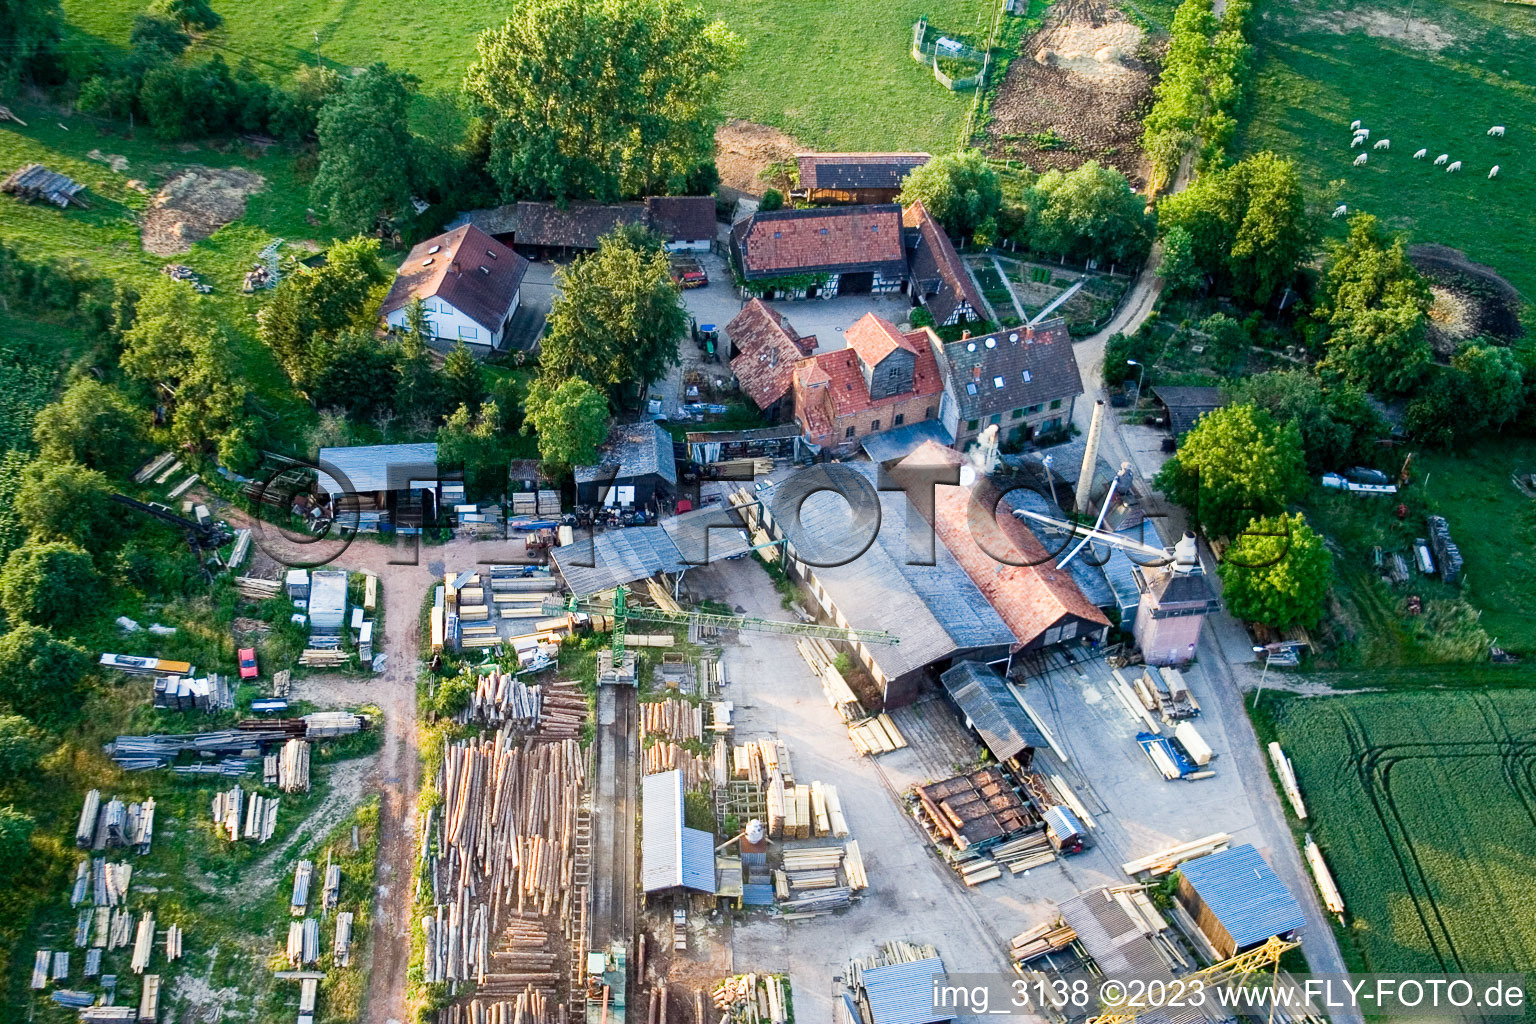 Schaidter mill in the district Schaidt in Wörth am Rhein in the state Rhineland-Palatinate, Germany from the drone perspective